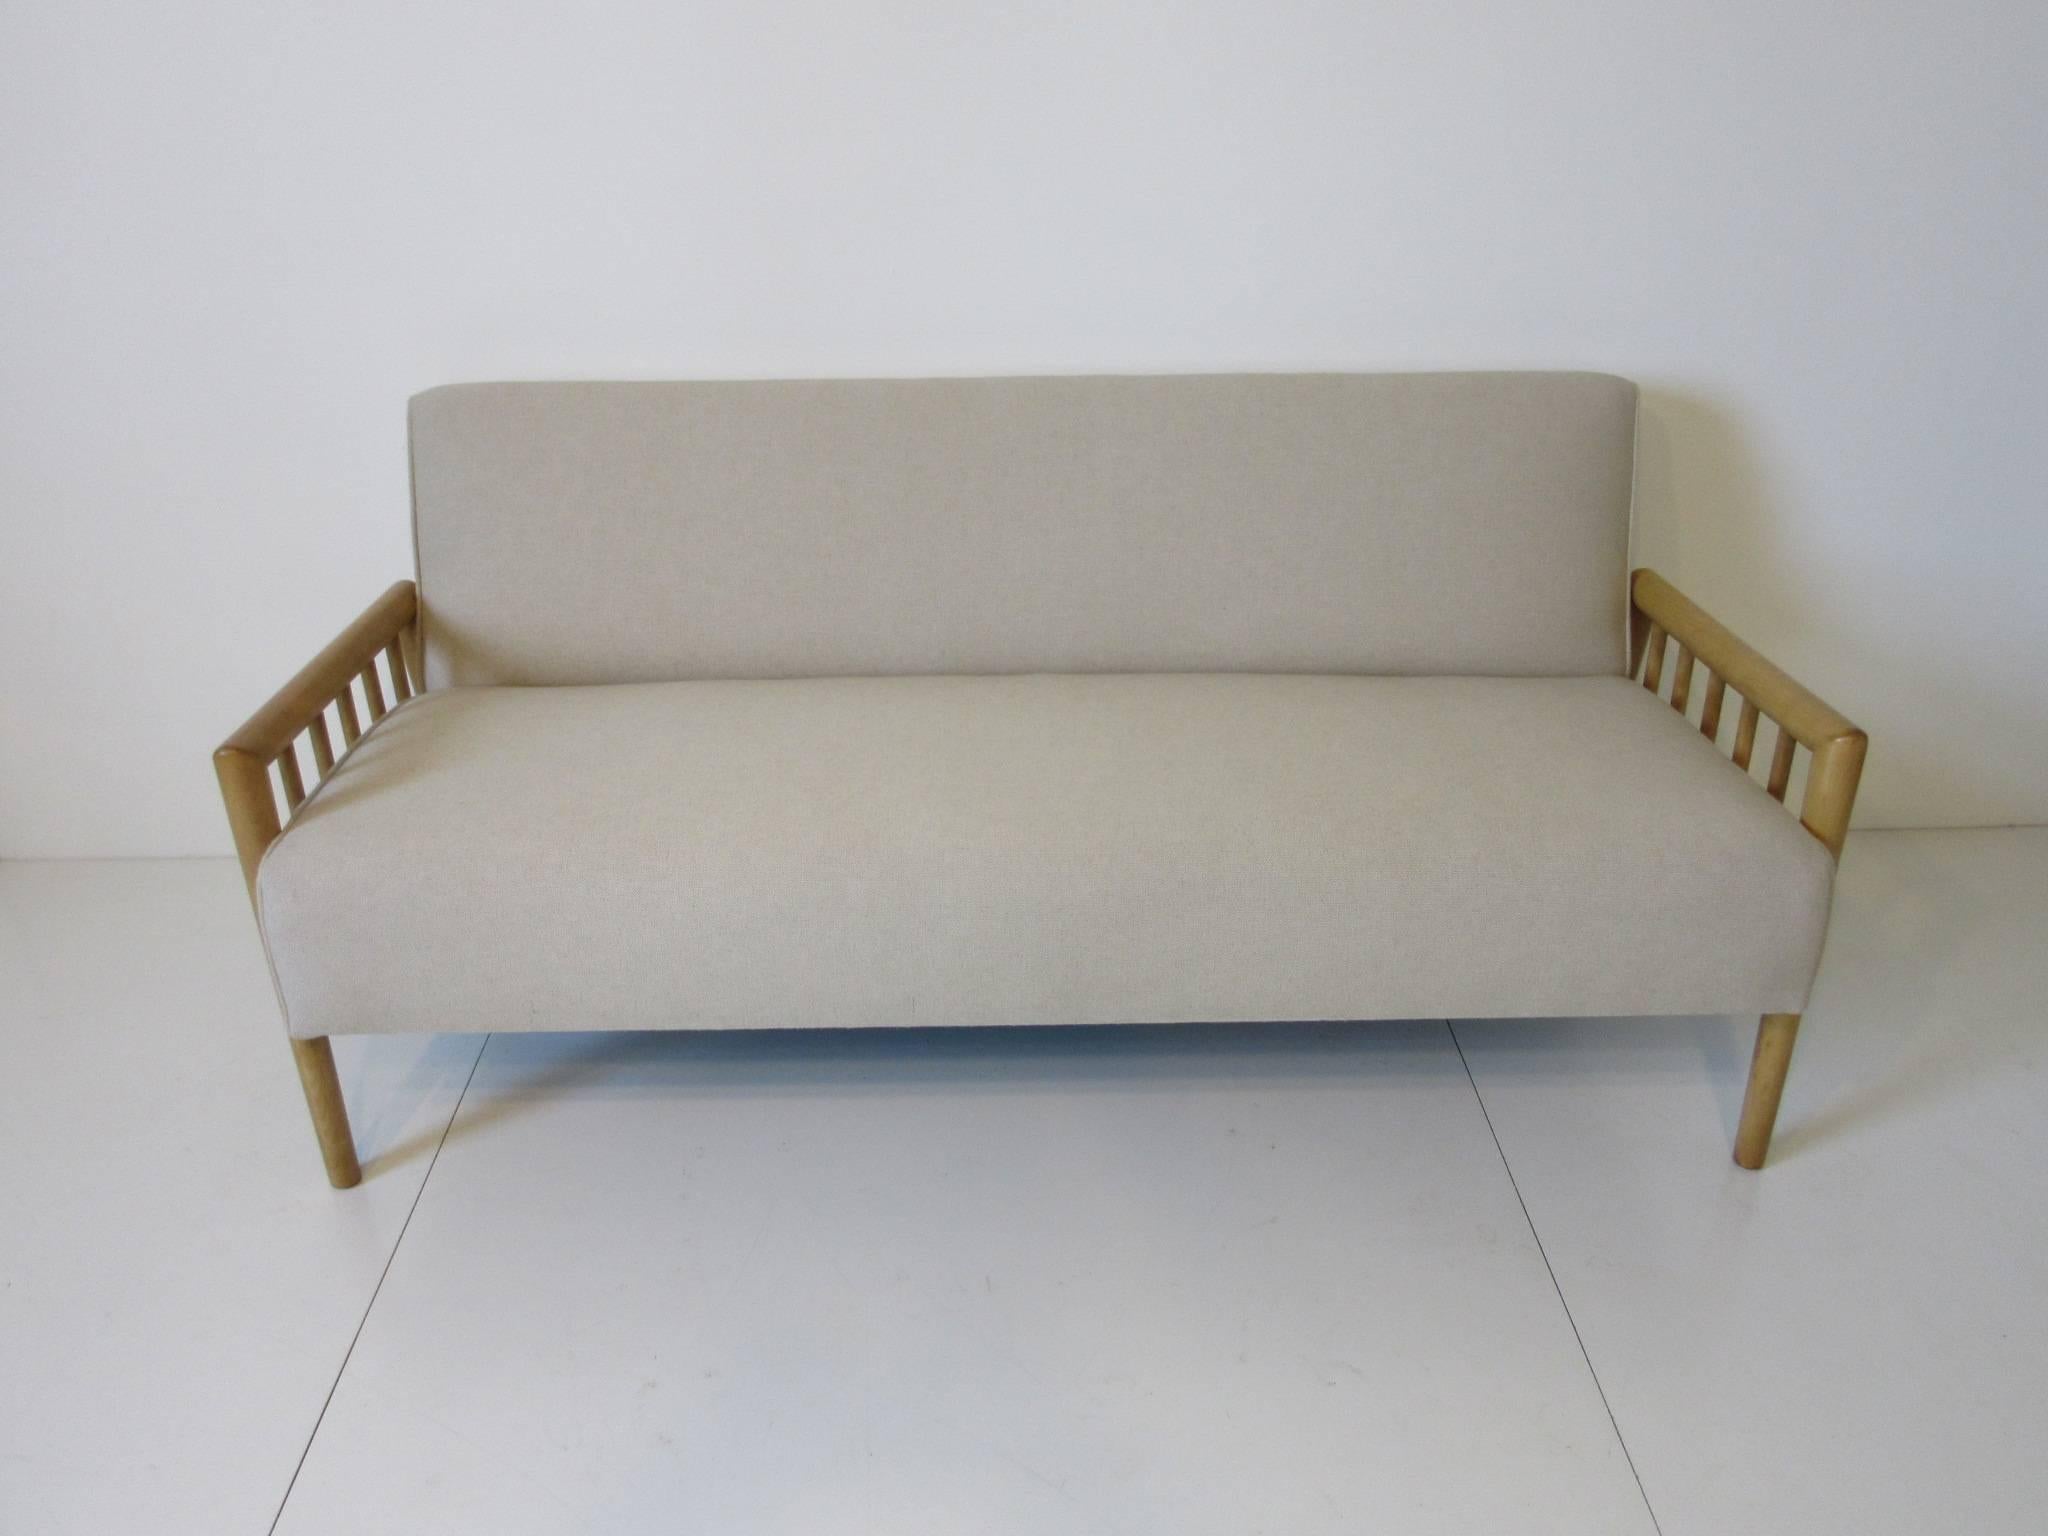 A linen upholstered smaller sized Gibbings loveseat sofa with open end arms and frame, a simple but elegant design from the well respected designer. Manufactured by the Widdicomb Furniture Company.